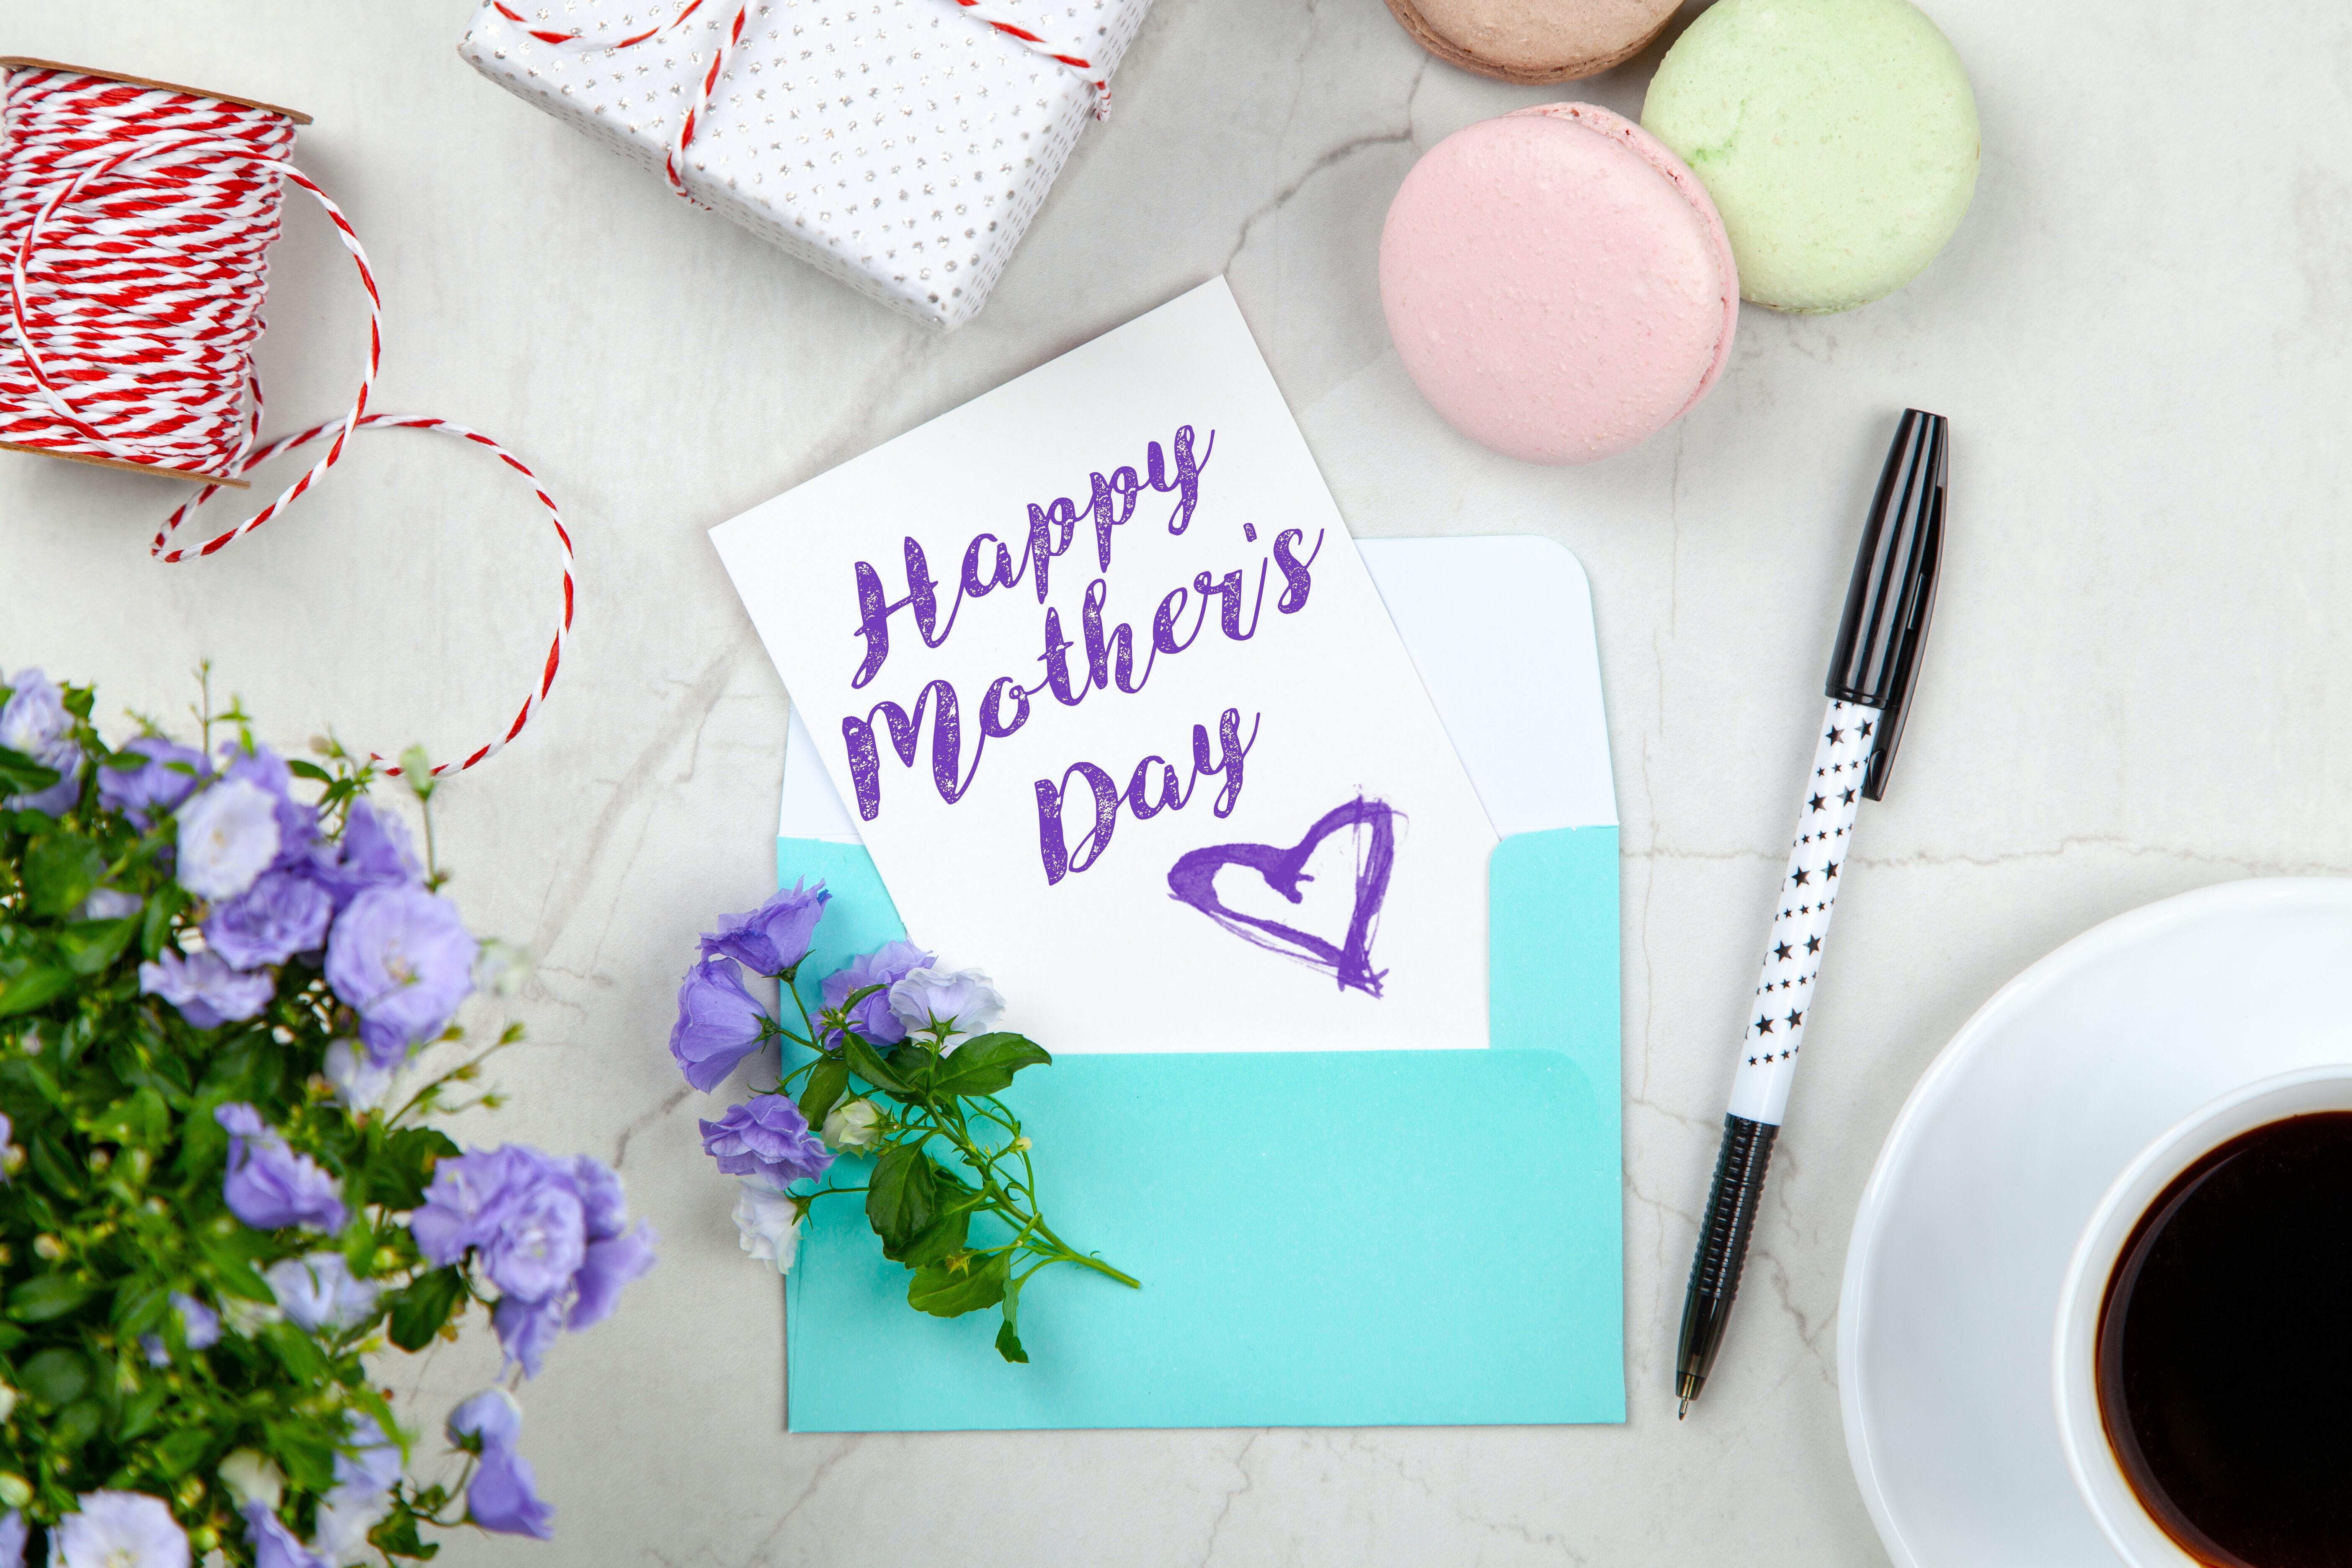 Appreciating the value of motherhood on this Mother’s Day